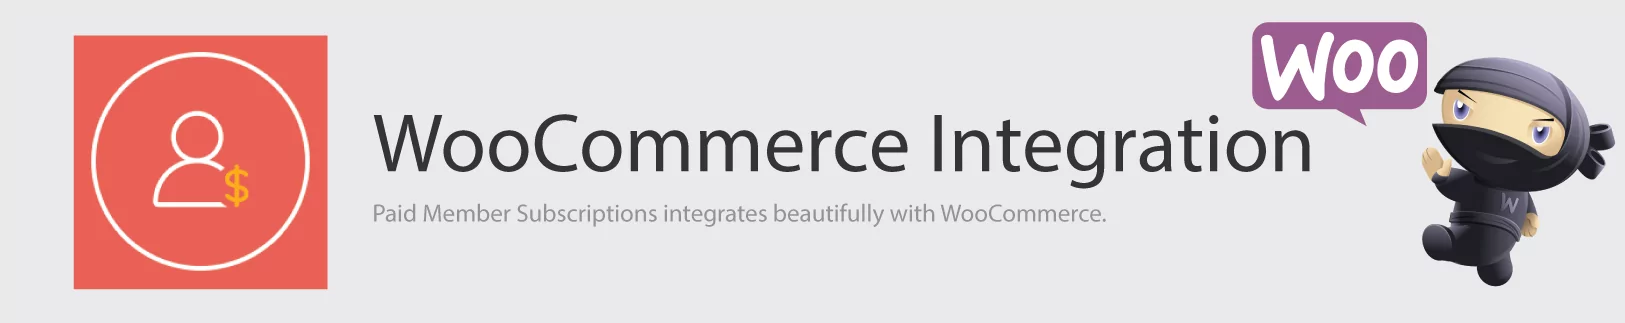 Paid Member Subscriptions - WooCommerce Integration